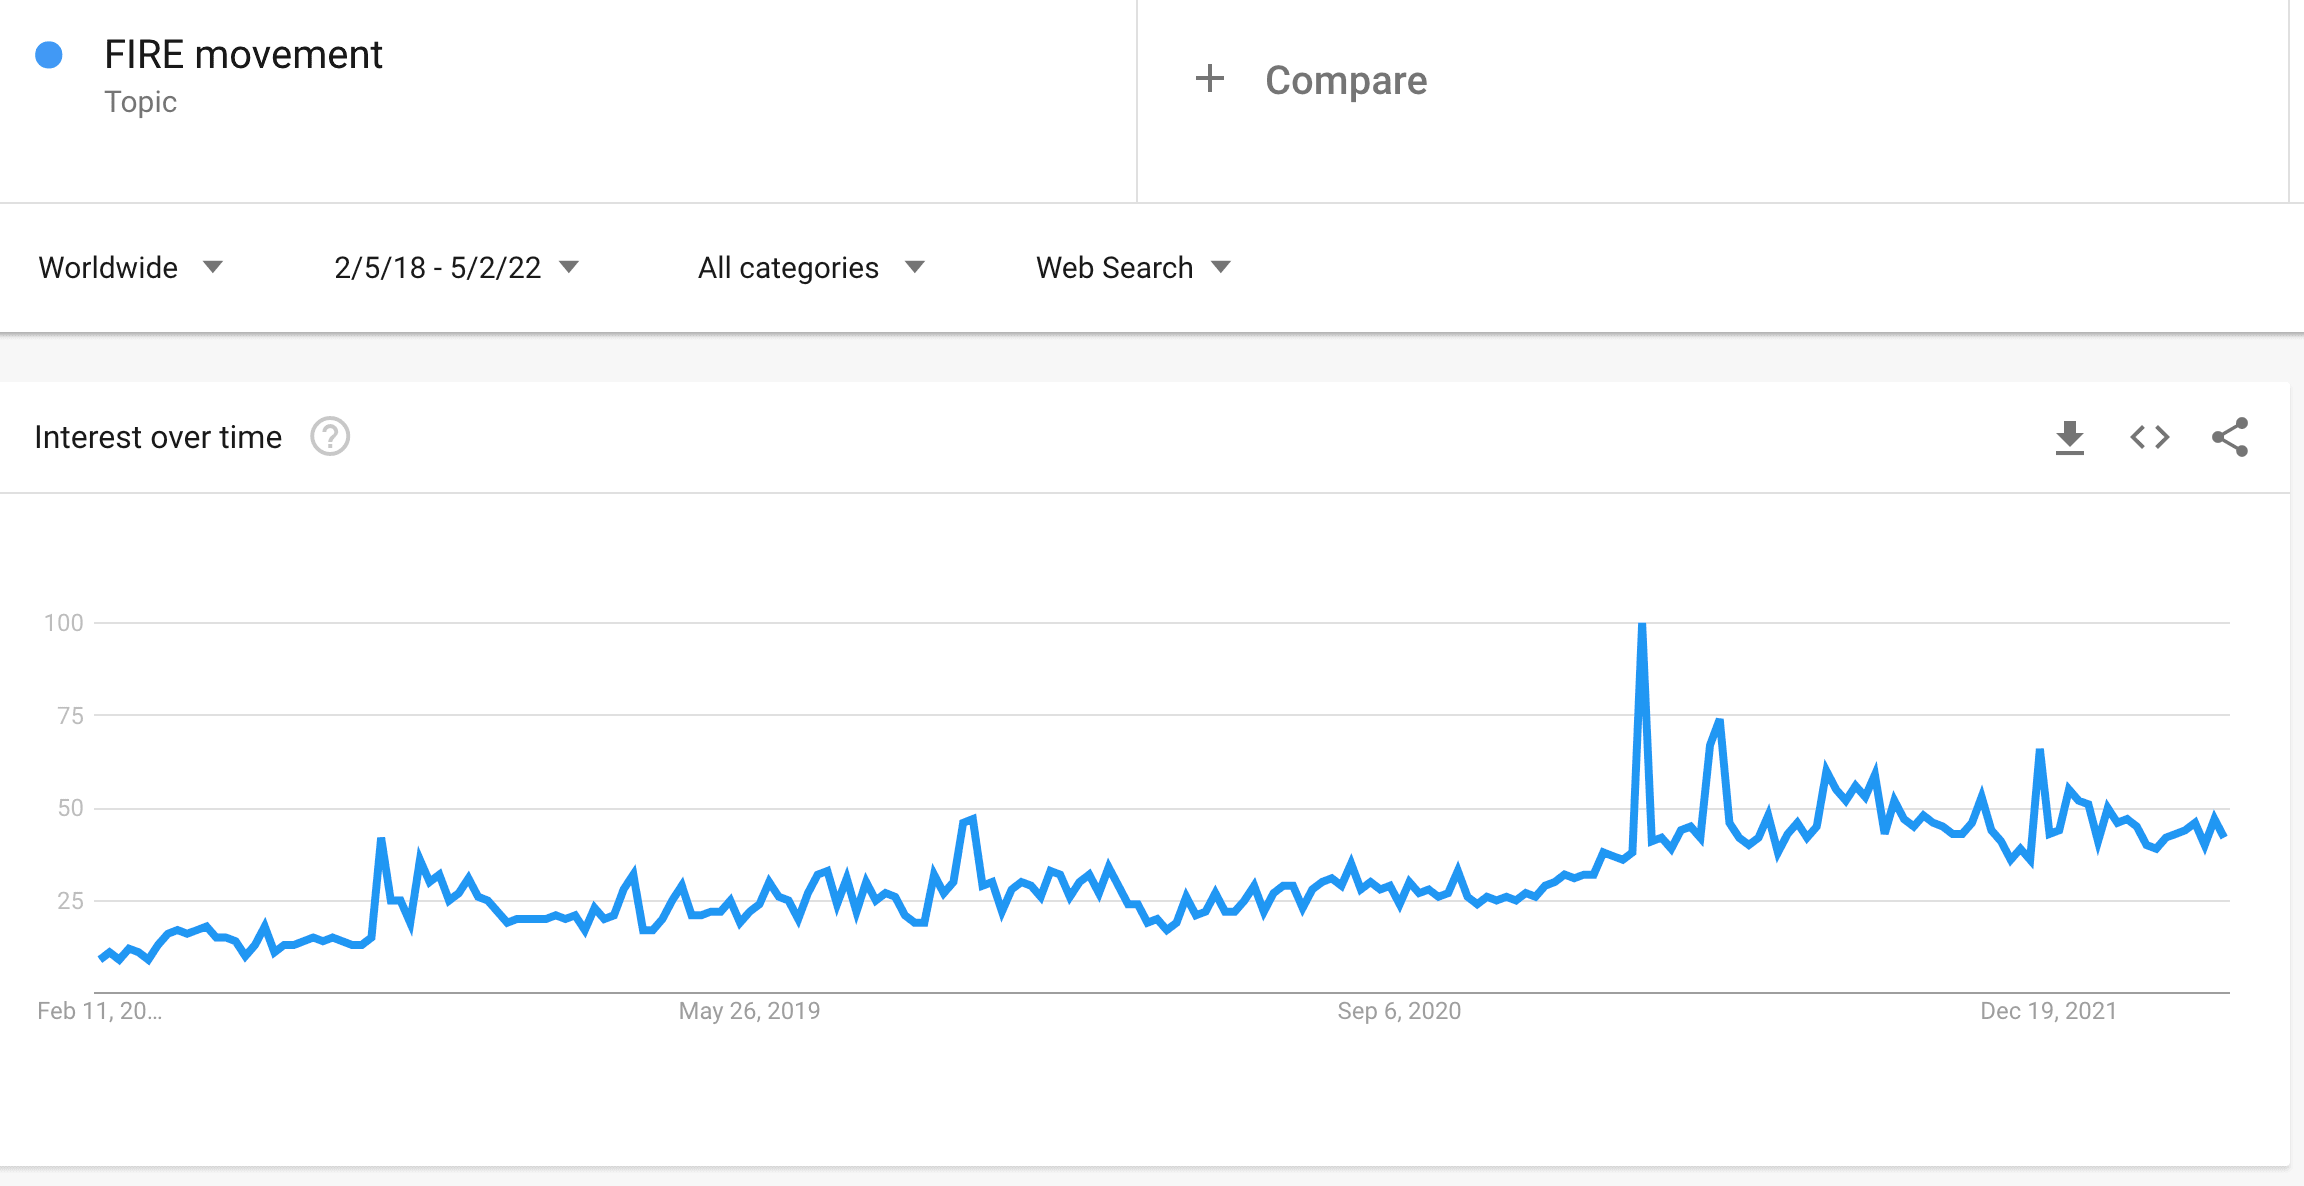 Graph showing searches for the FIRE movement